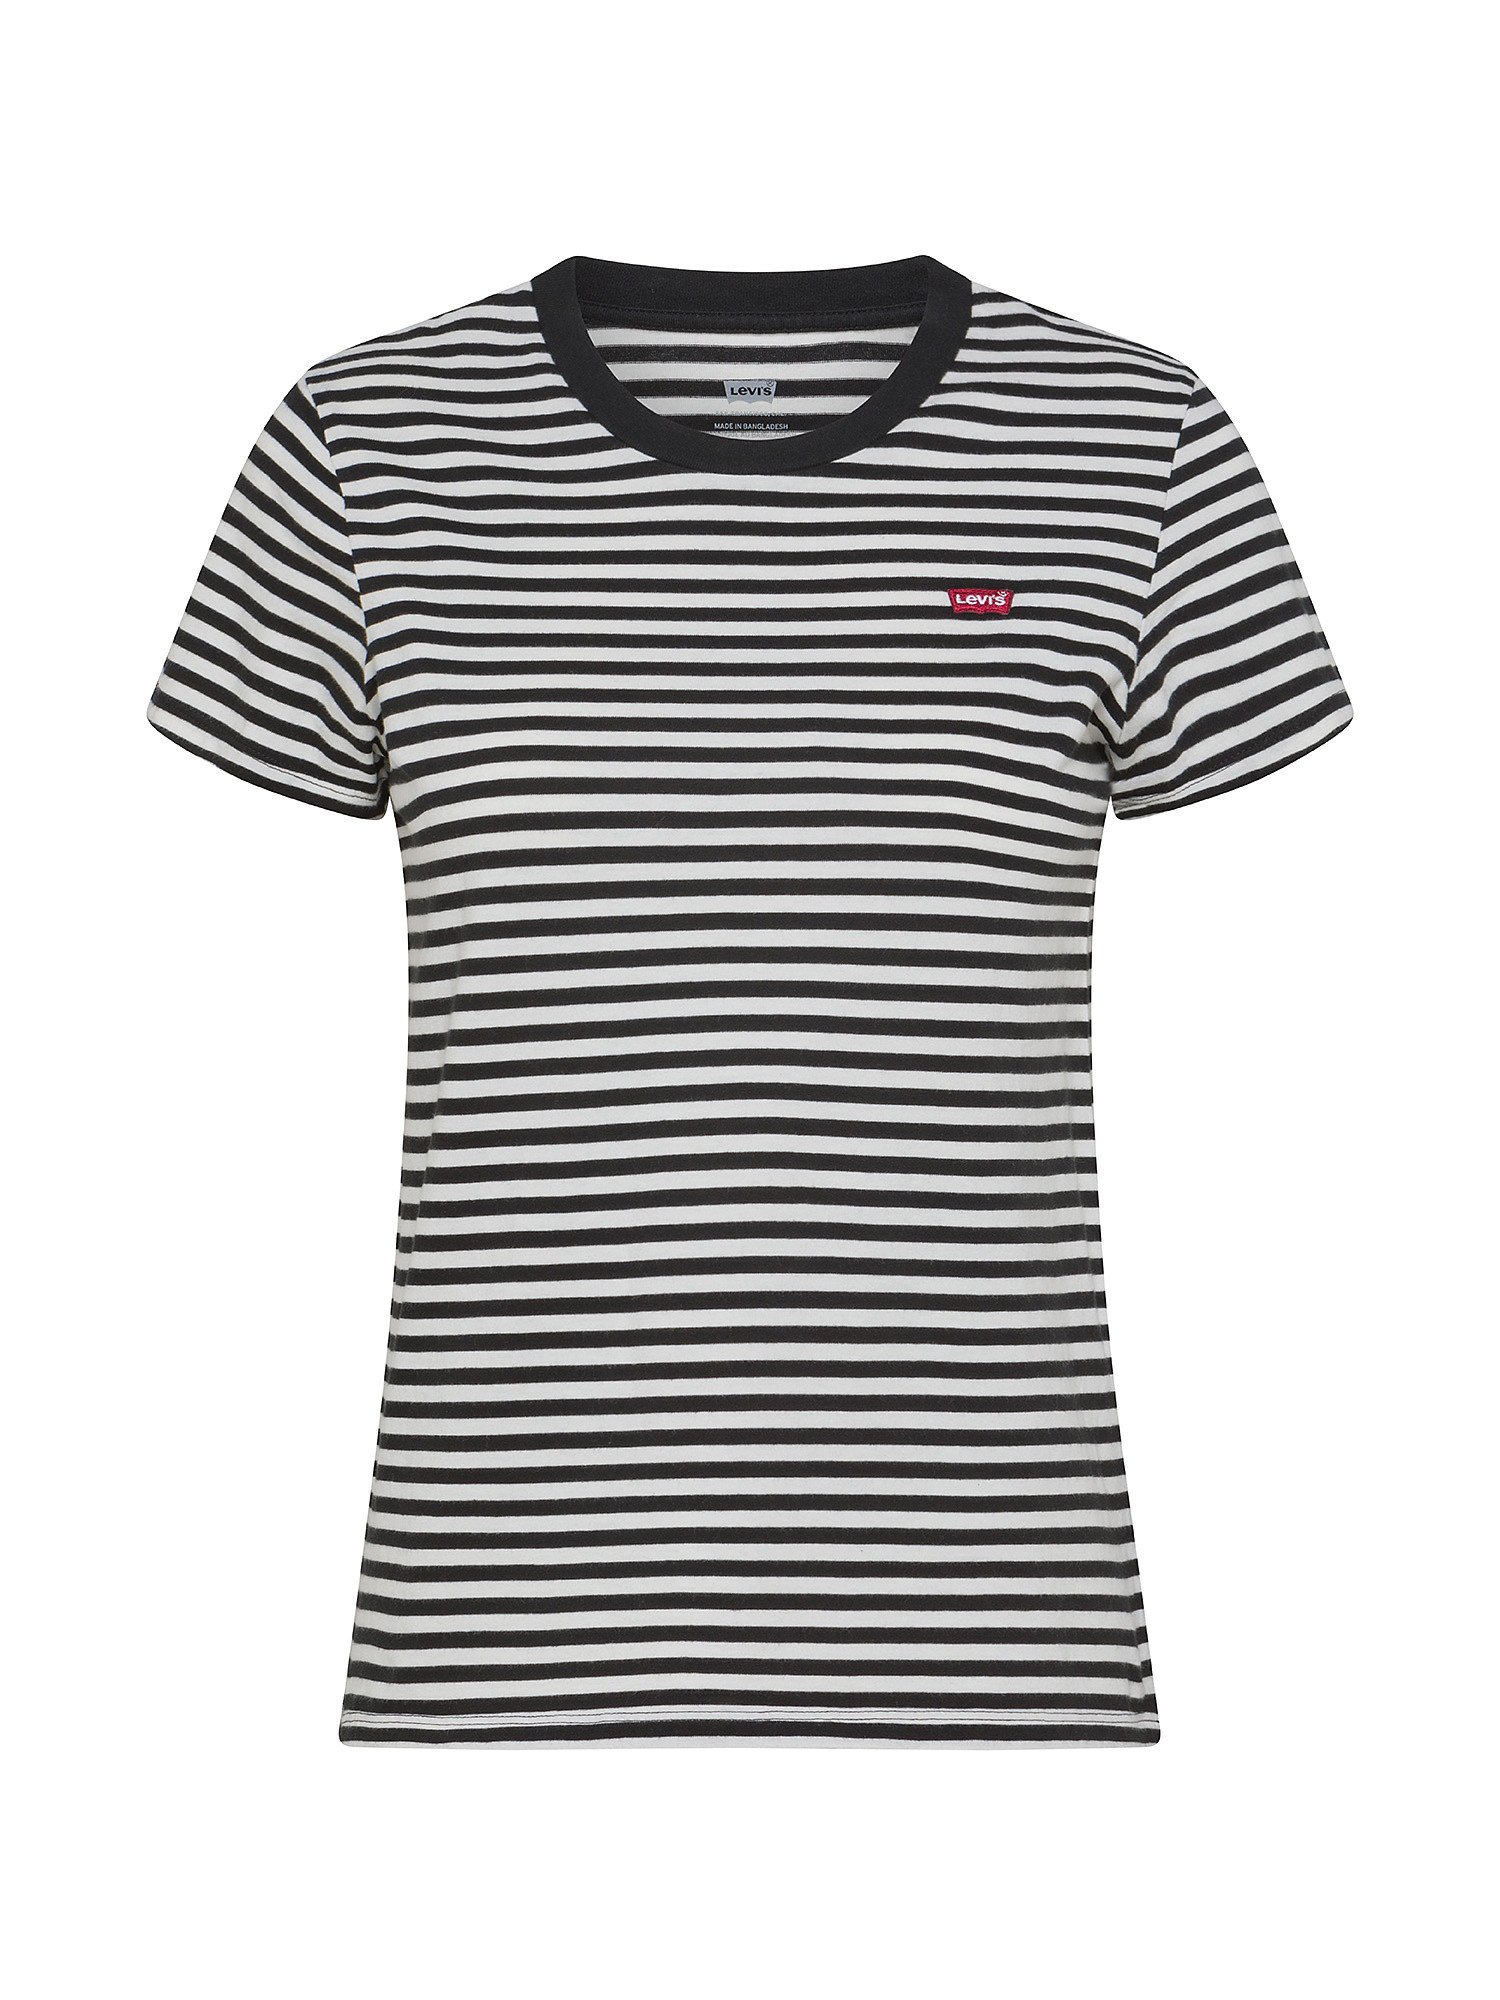 Levi's - T-shirt a righe, Nero, large image number 0